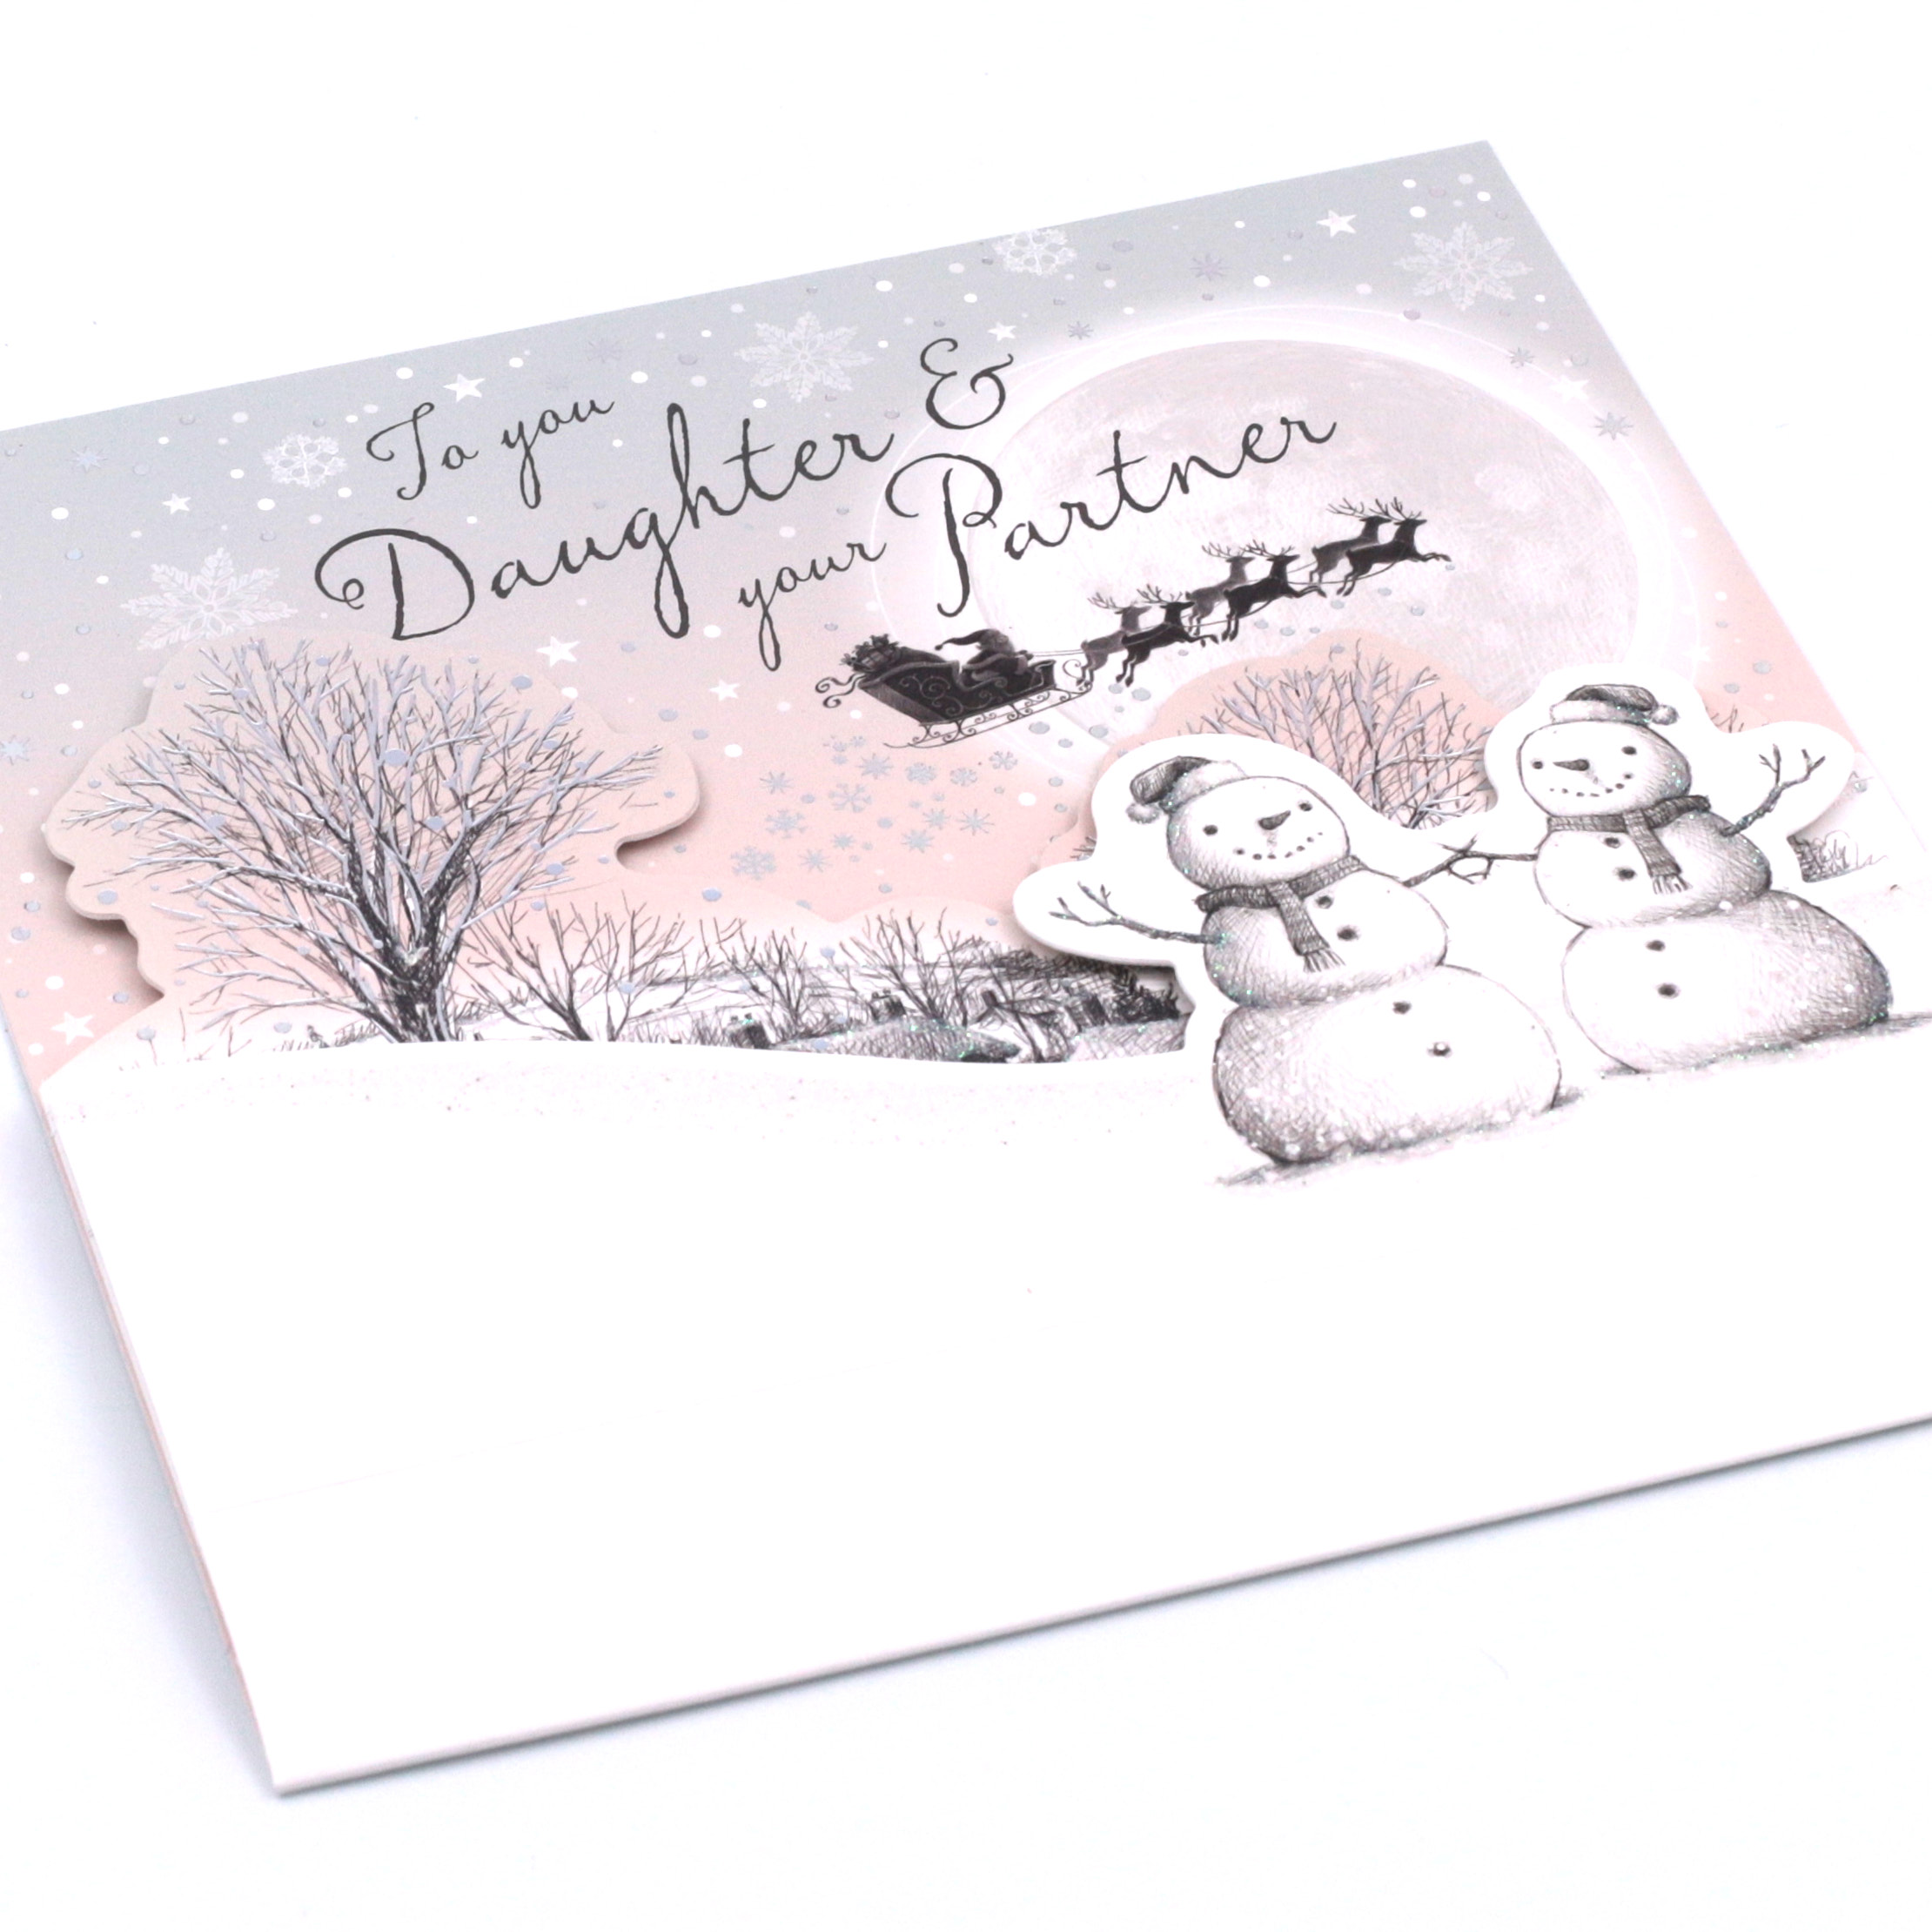 Exquisite Collection Christmas Card - Daughter And Partner, Snowmen 3D Card